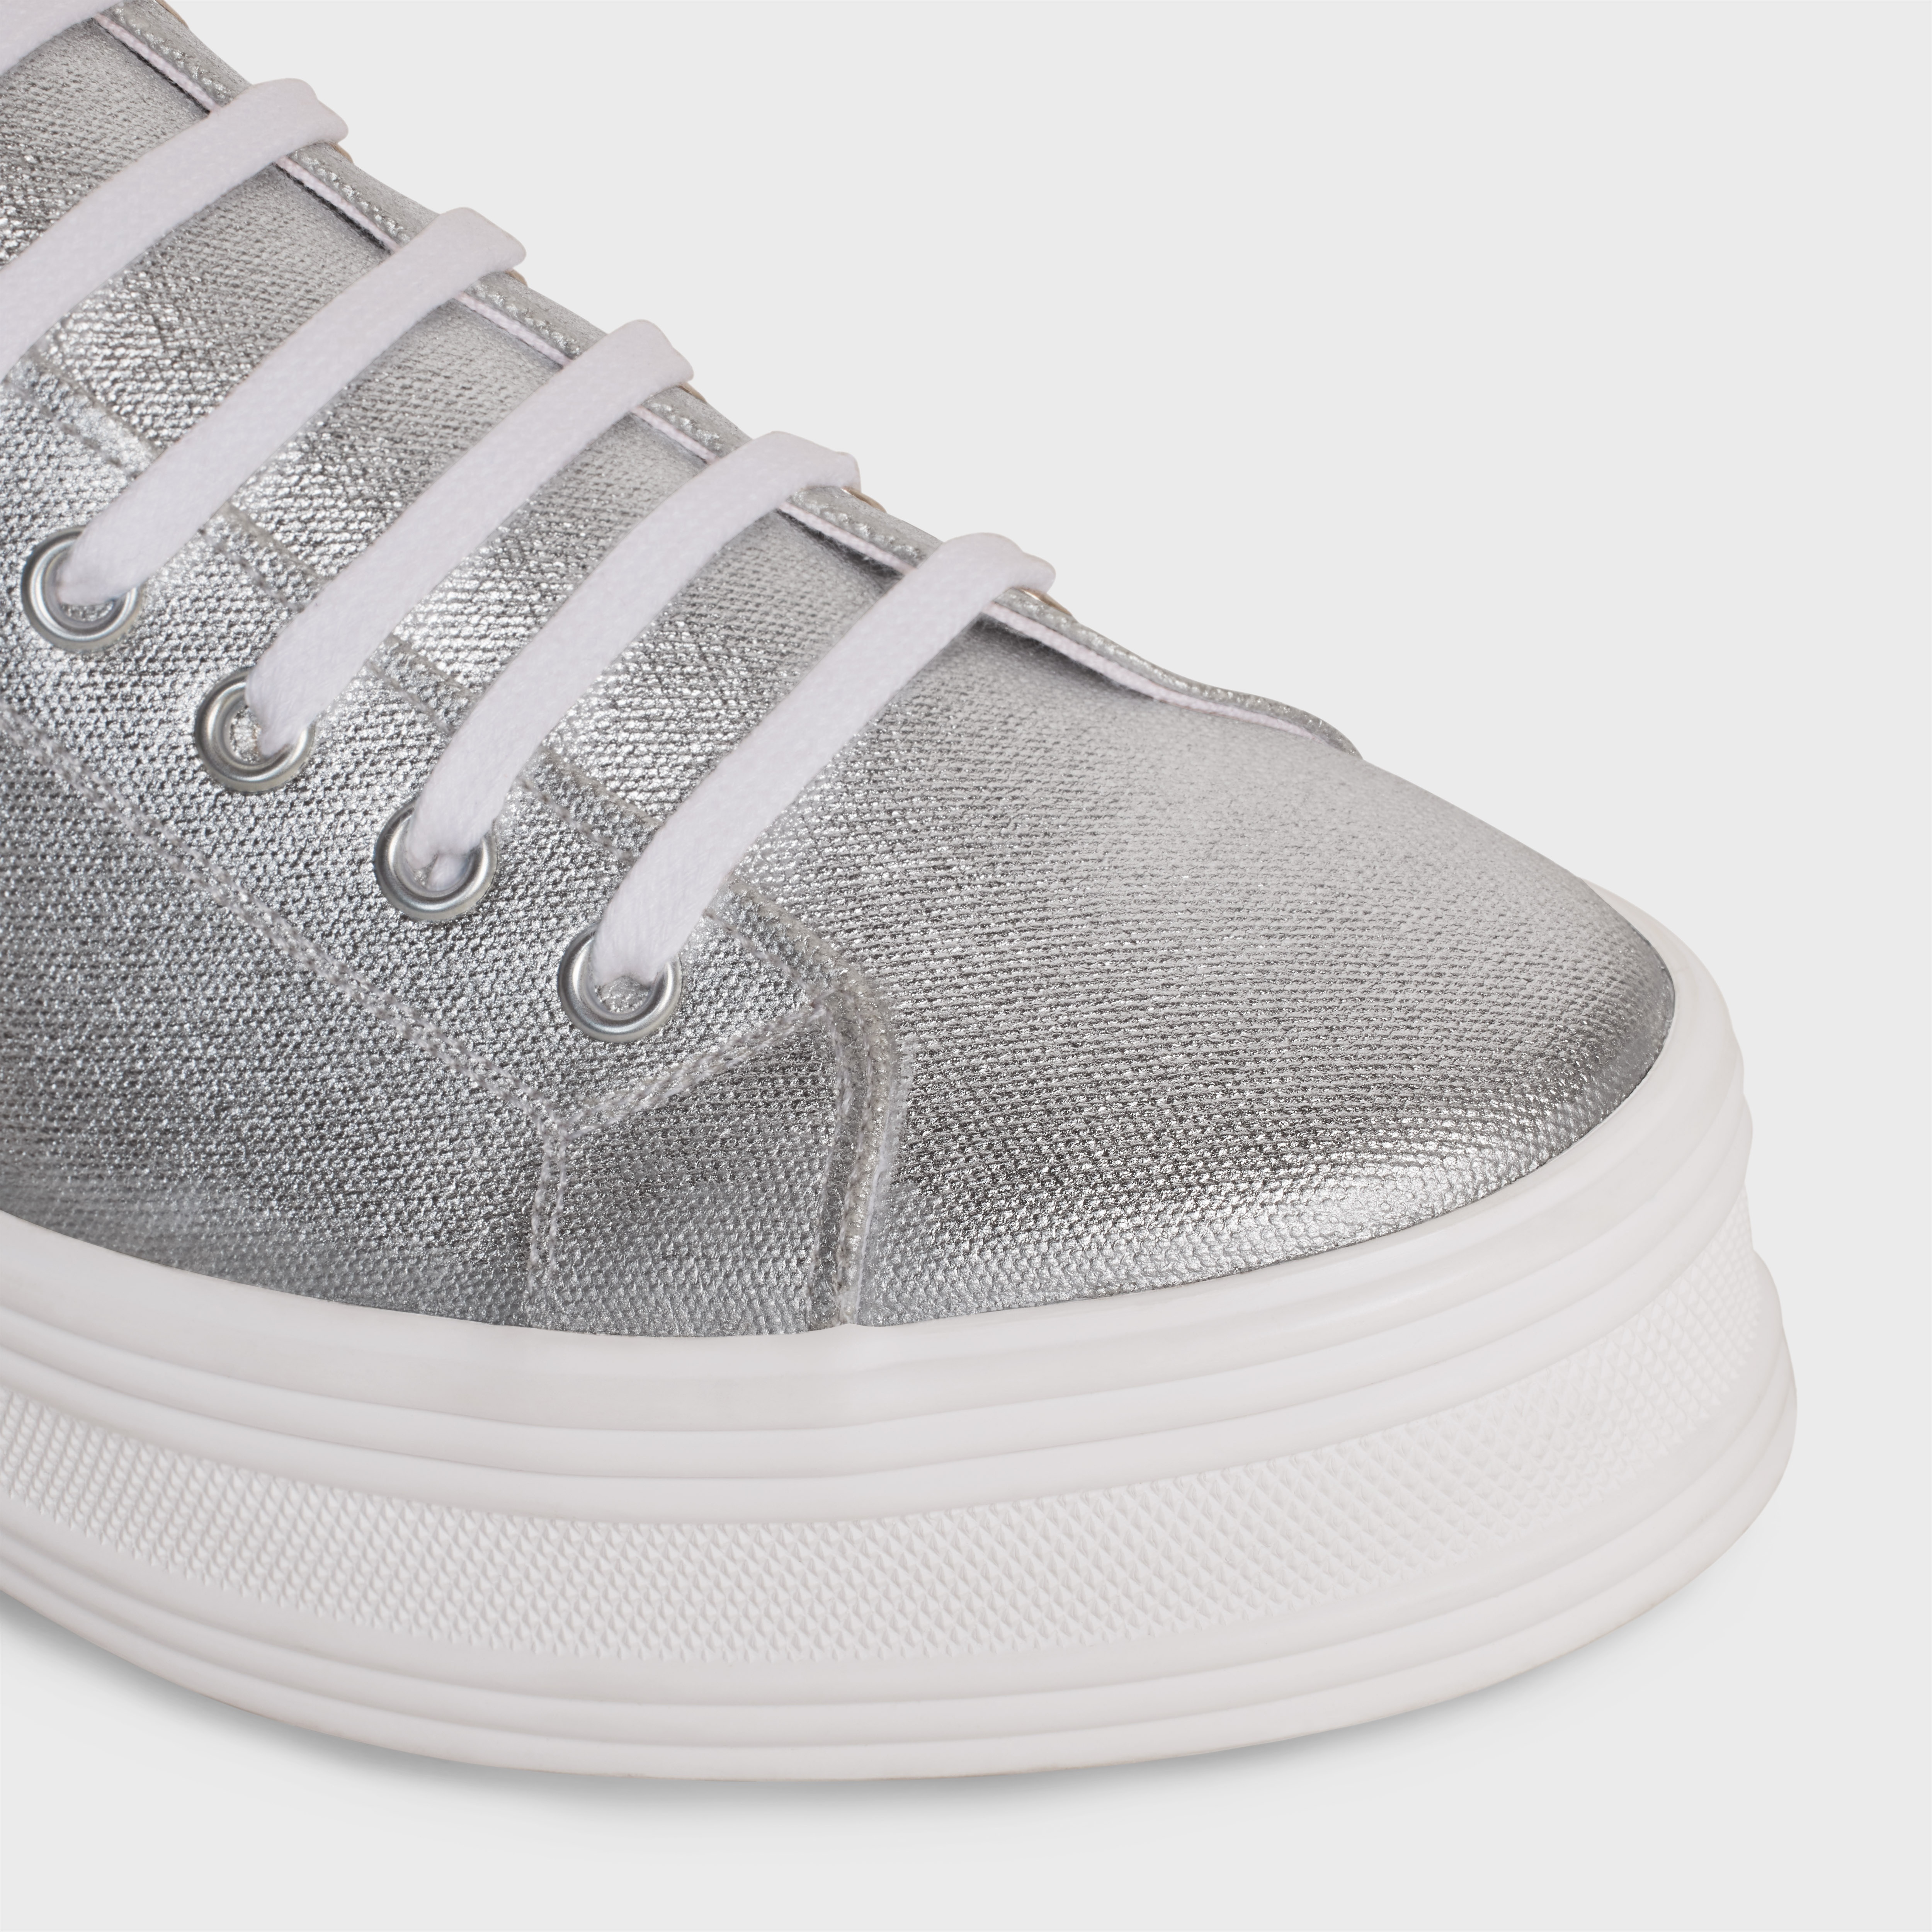 JANE LOW LACE-UP SNEAKER in METALLIC CANVAS AND CALFSKIN - 4